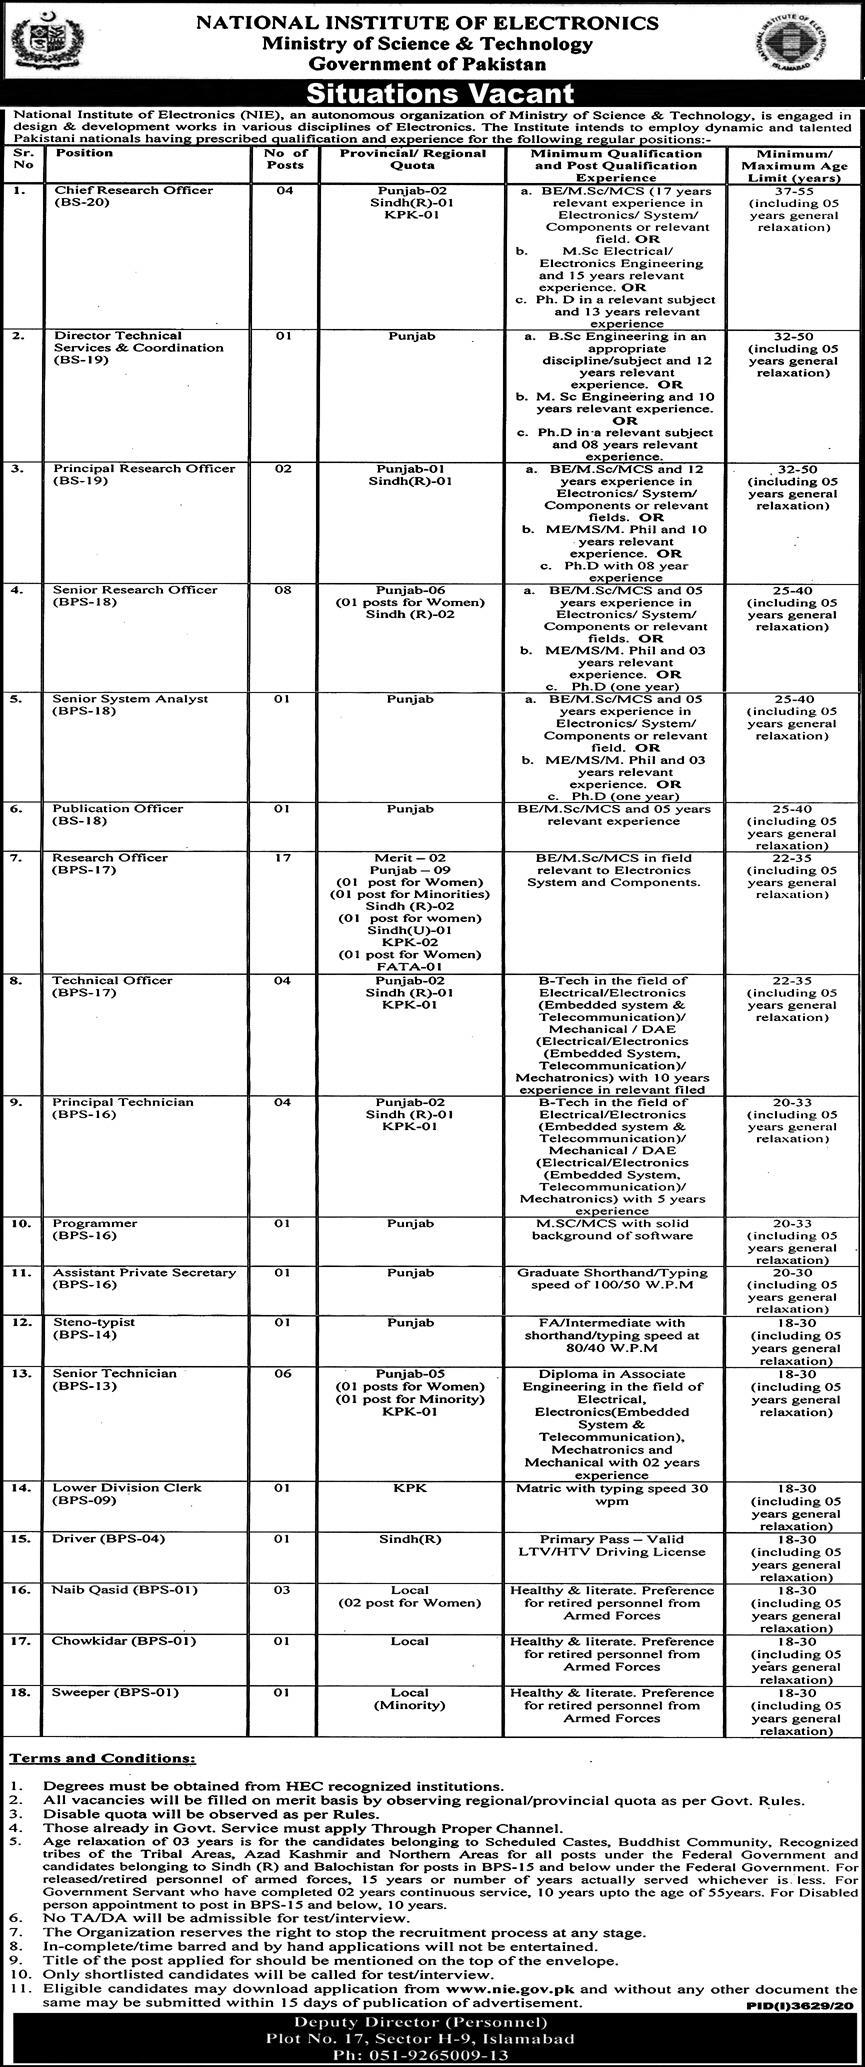 National Institute of Electronics Ministry of Science & Technology Jobs 2023